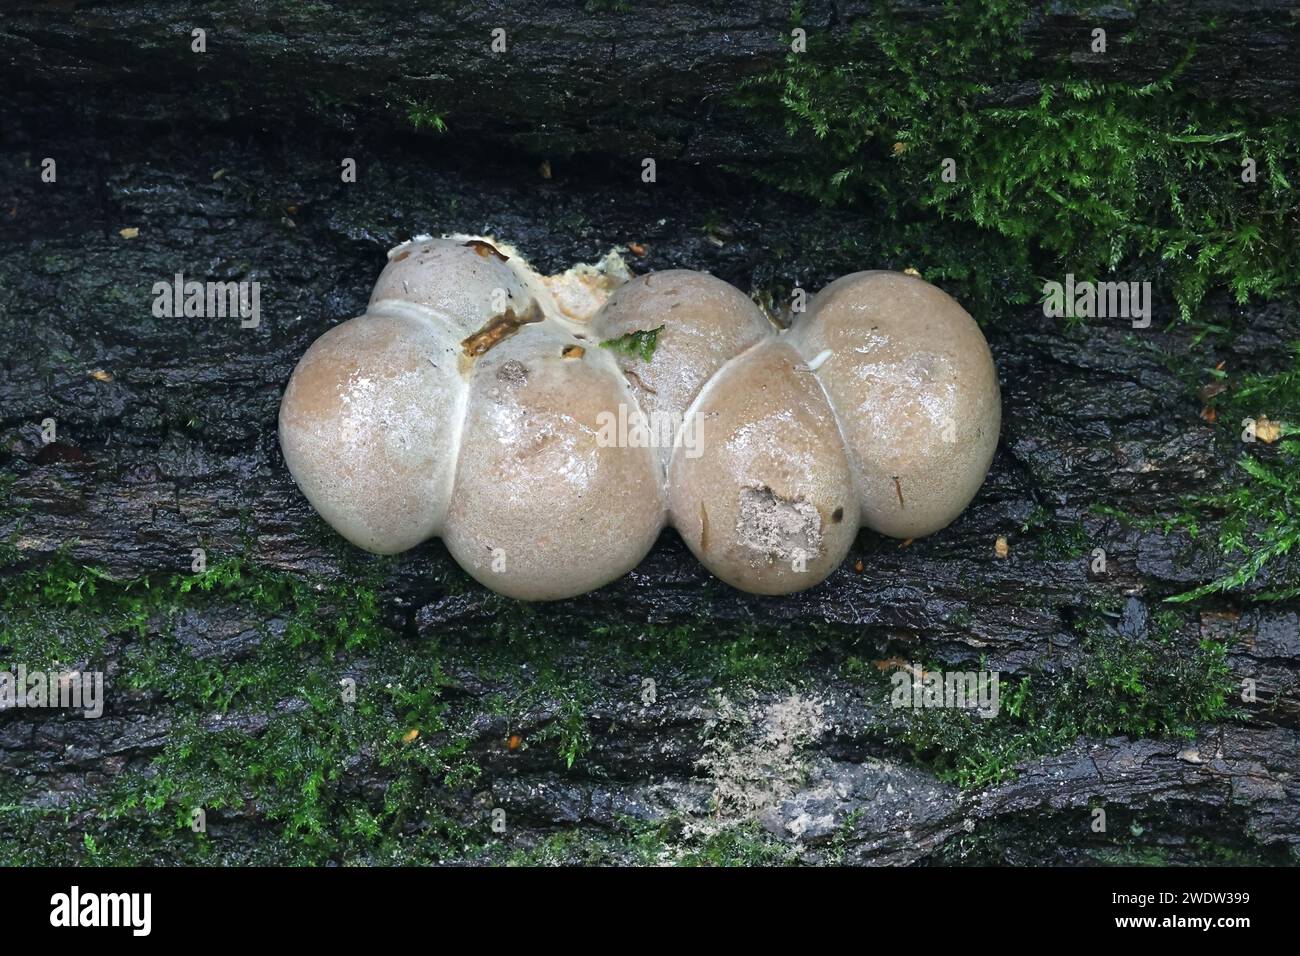 Lycogala flavofuscum, greater wolf's milk slime mold, myxomycetes from Finland Stock Photo